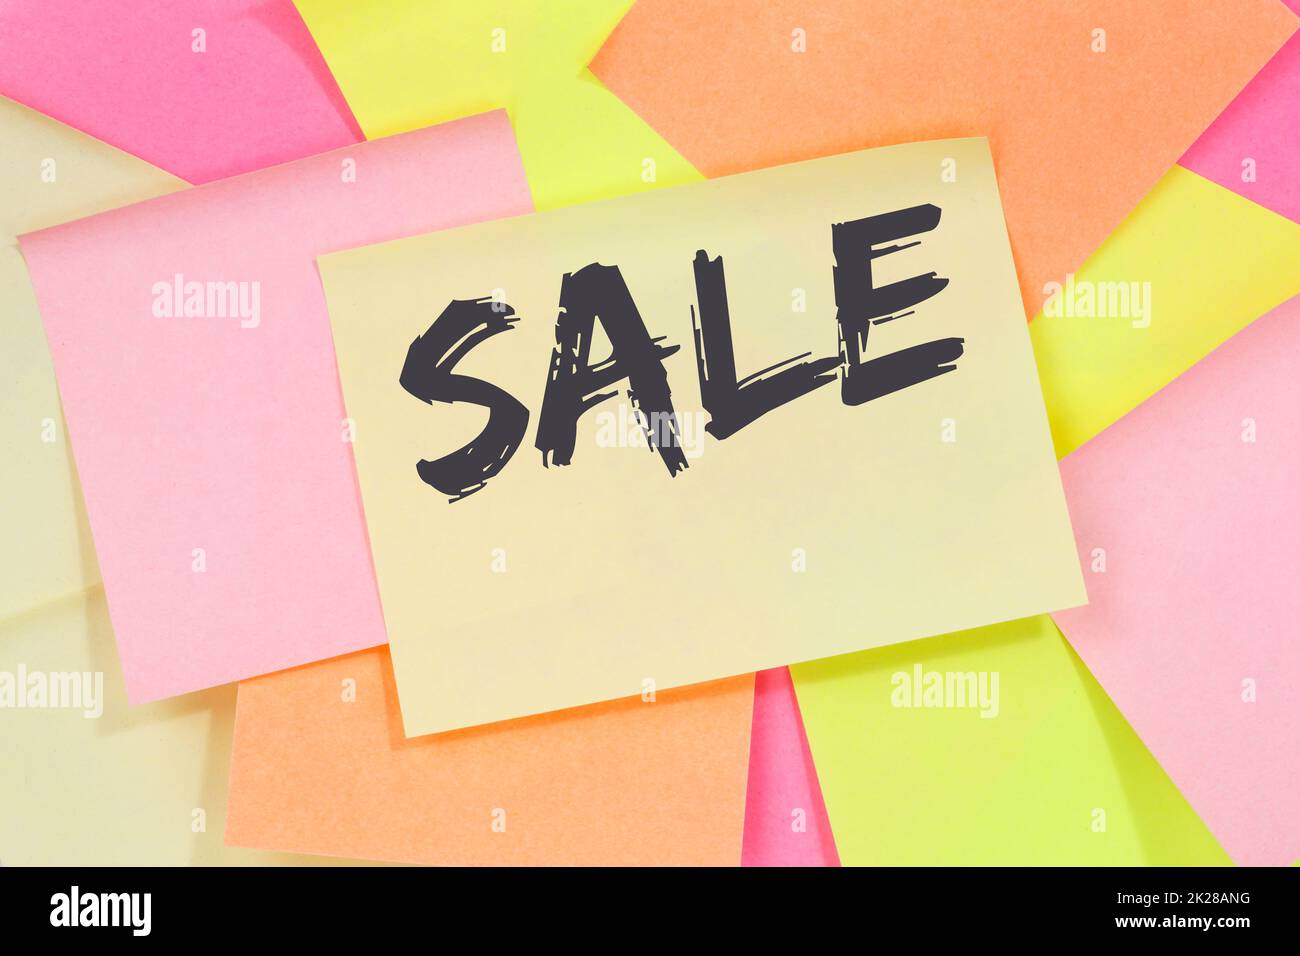 Sale shopping special offer business concept note paper Stock Photo